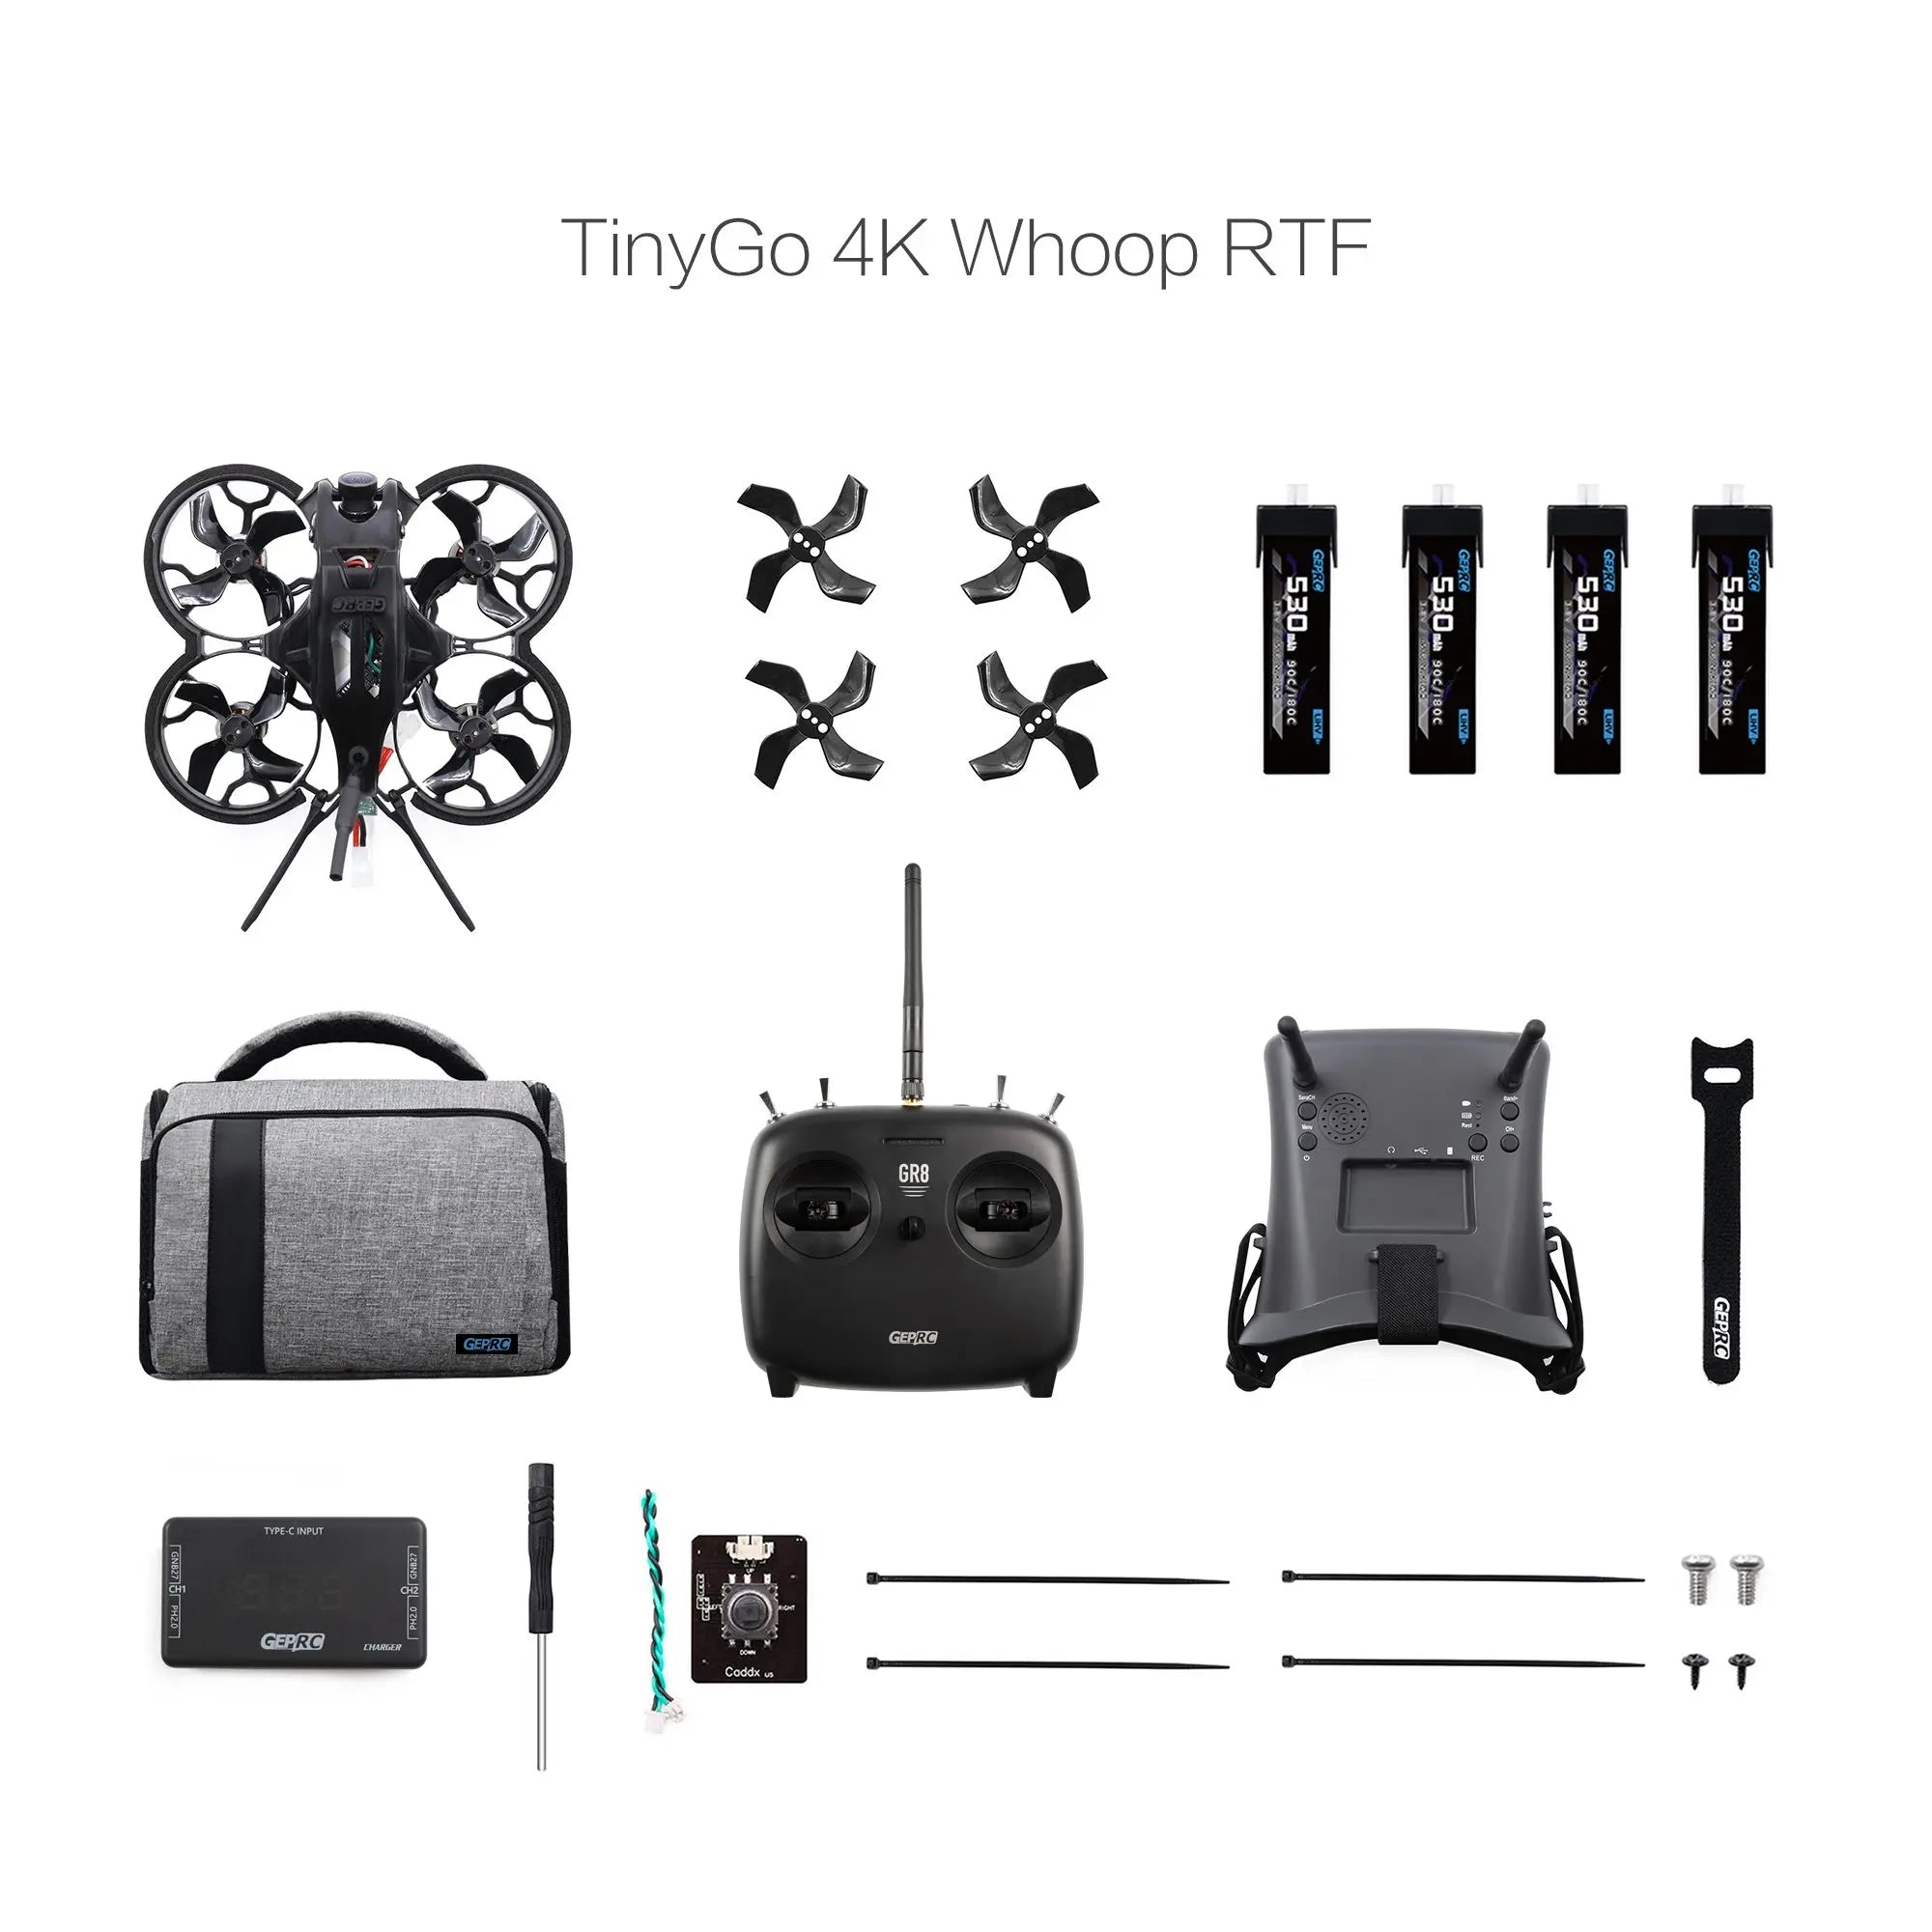 GEPRC TinyGO FPV Drone, it's important to have knowledge of drone assembly and the necessary tools to ensure proper installation and